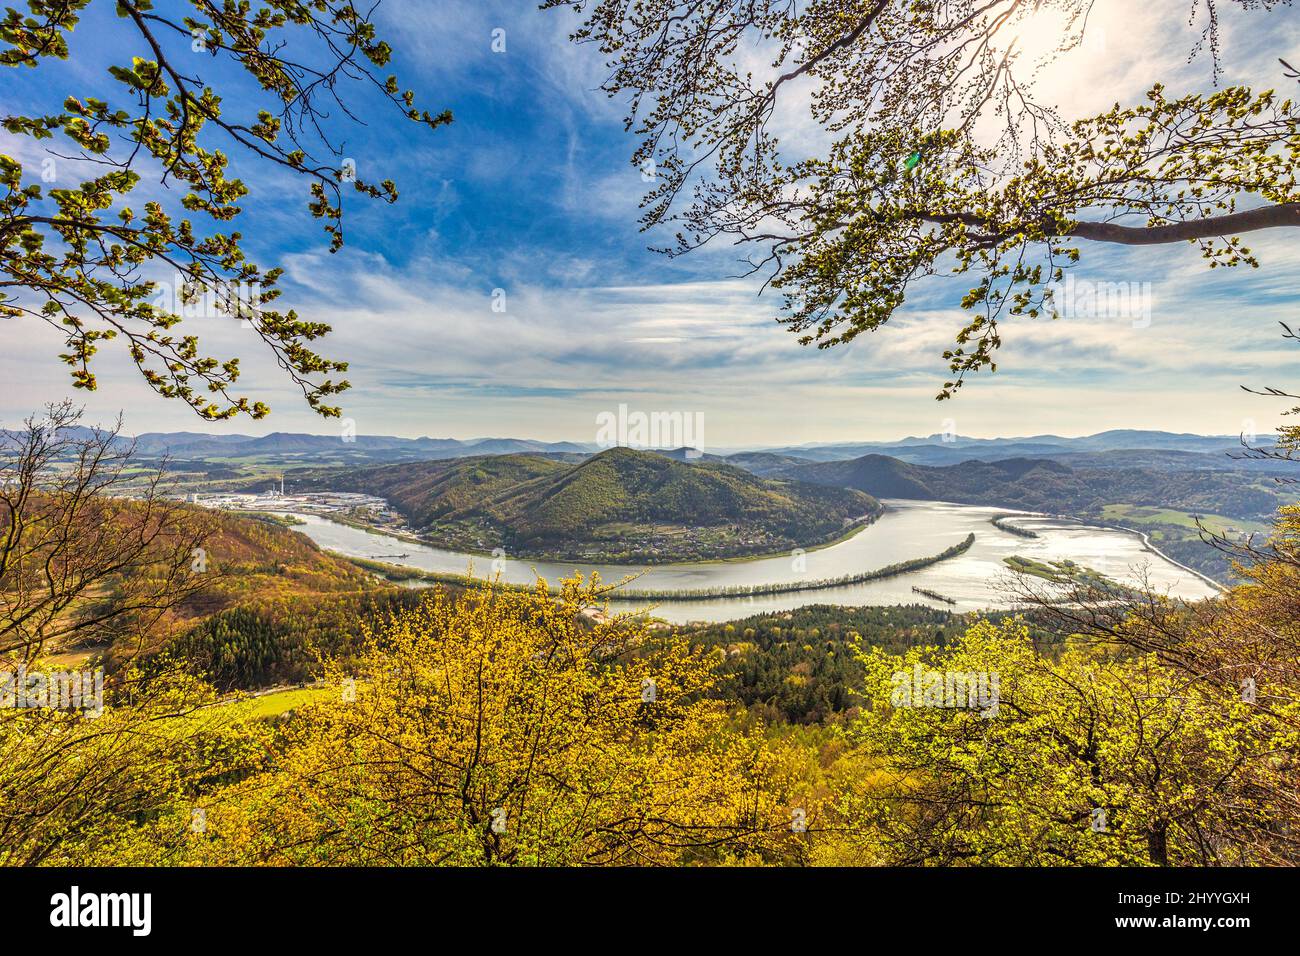 View of the Nosice dam on the Vah river from the Klapy hill near Povazska Bystrica town in northwestern Slovakia, Europe. Stock Photo